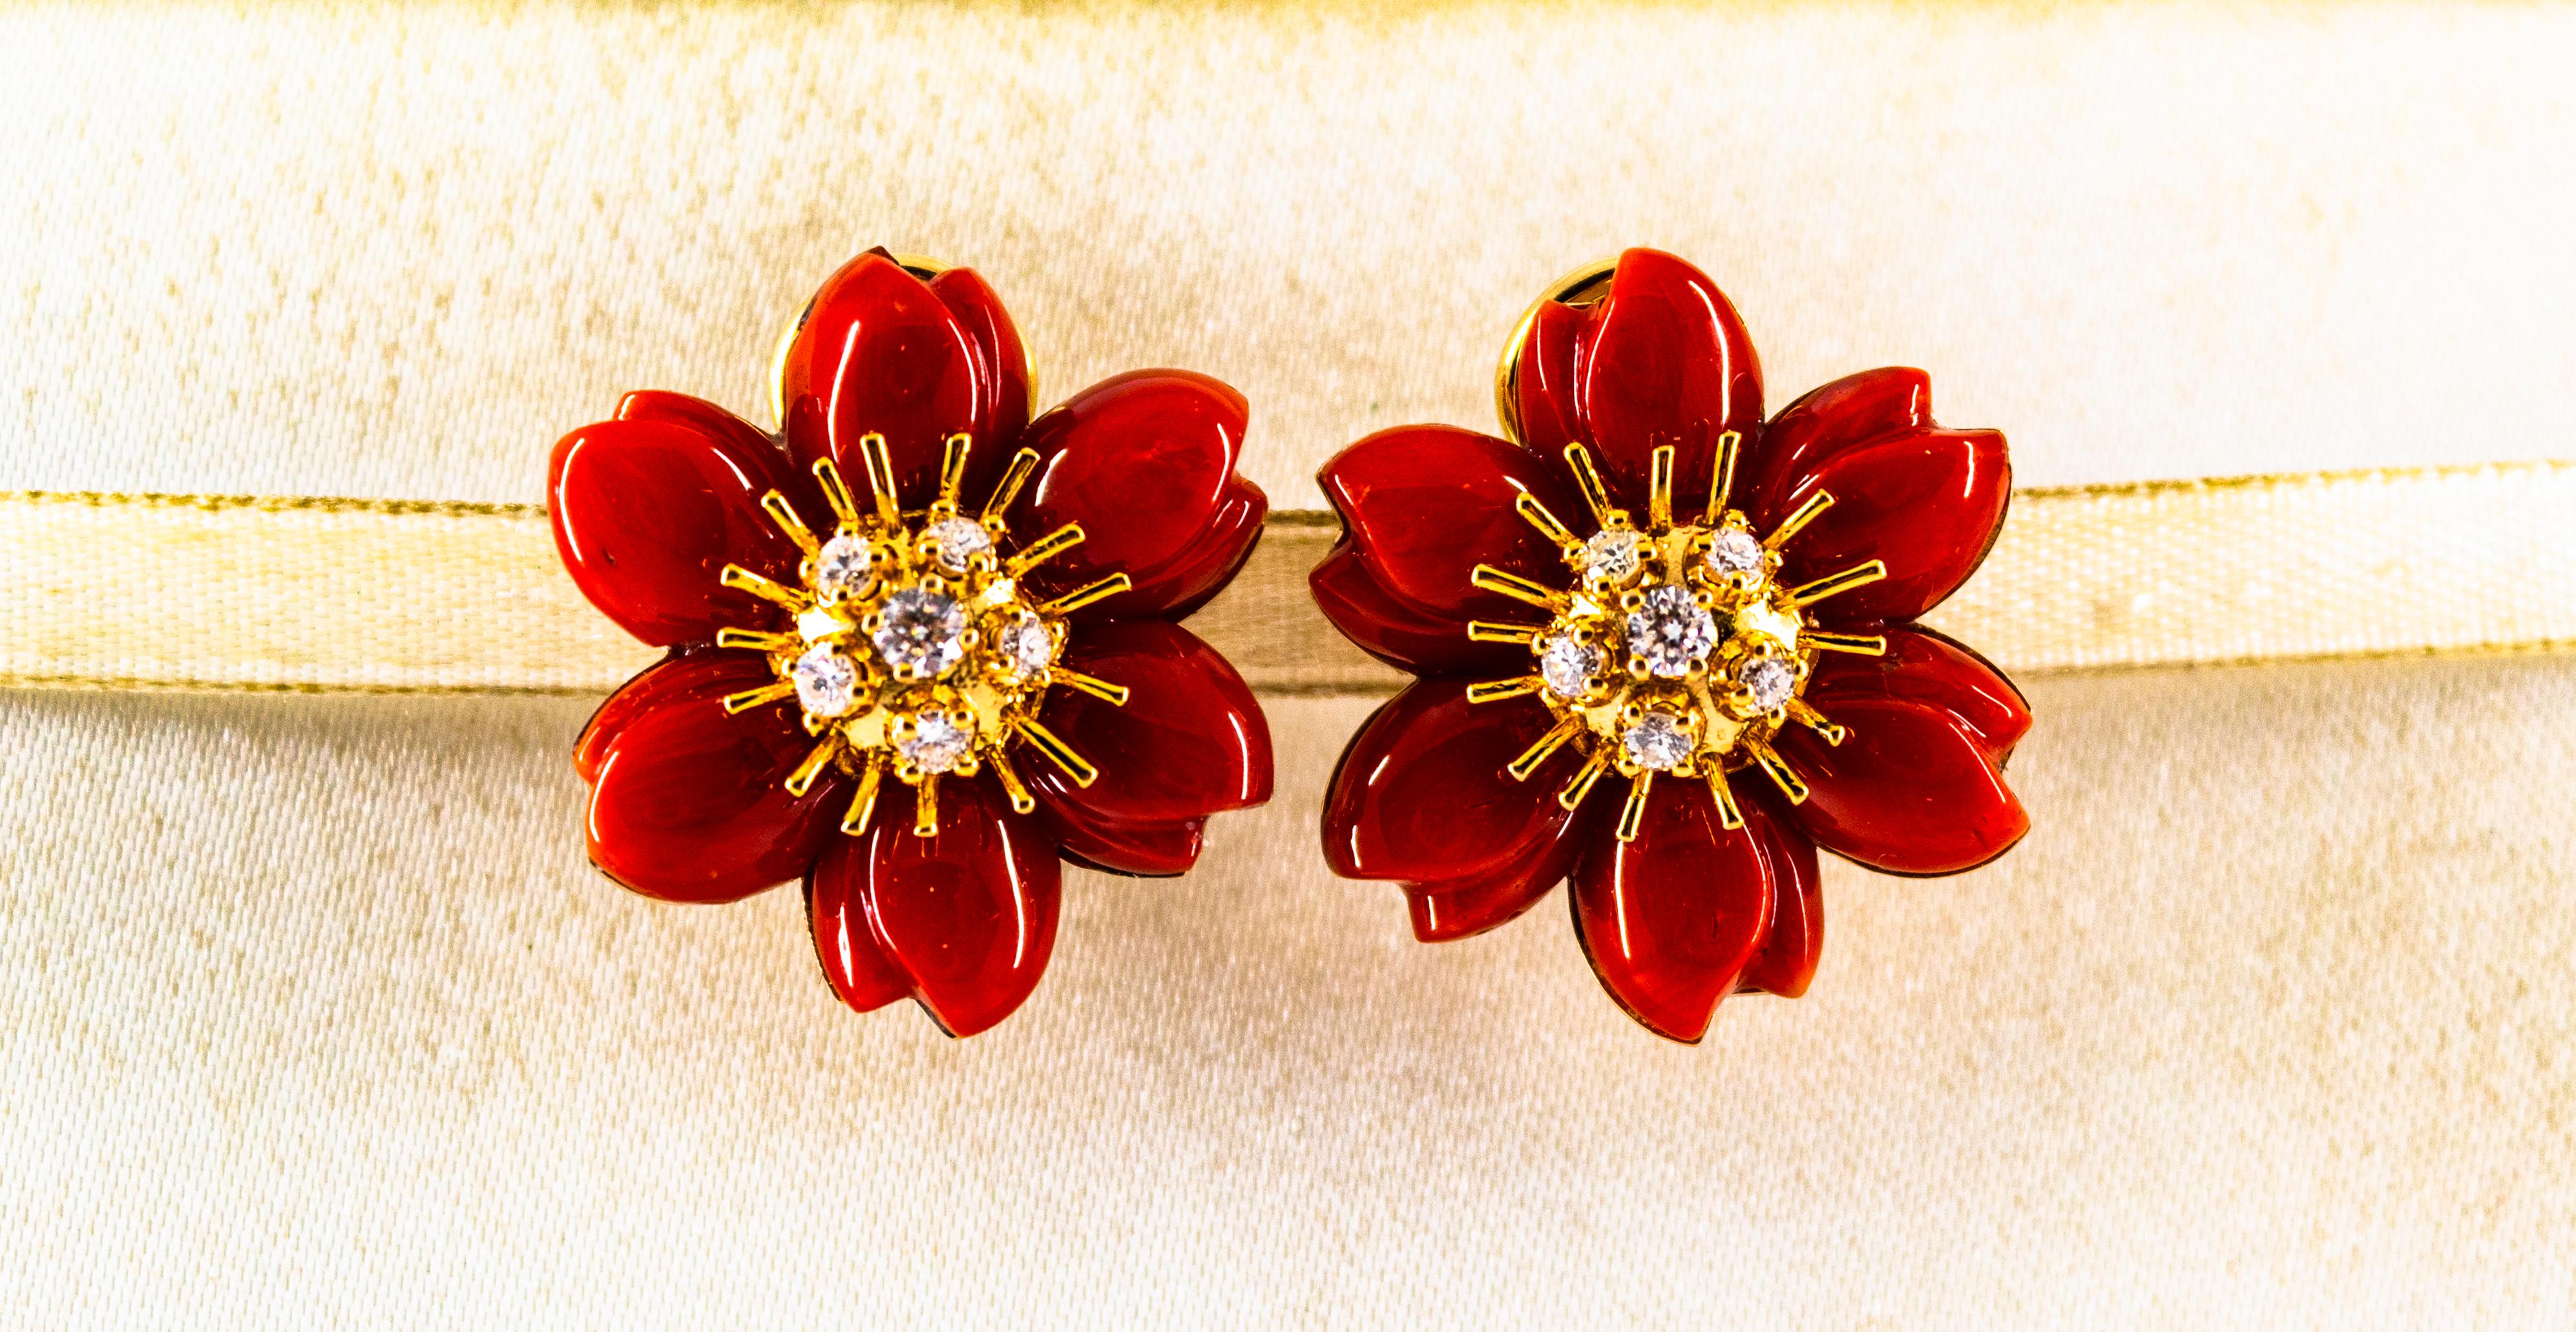 These Earrings are made of 14K Yellow Gold.
These Earrings have 0.60 Carats of White Diamonds.
These Earrings have Mediterranean (Sardinia, Italy) Red Coral.
These Earrings are available also in White Coral, Pink Coral, Turquoise or Lapis